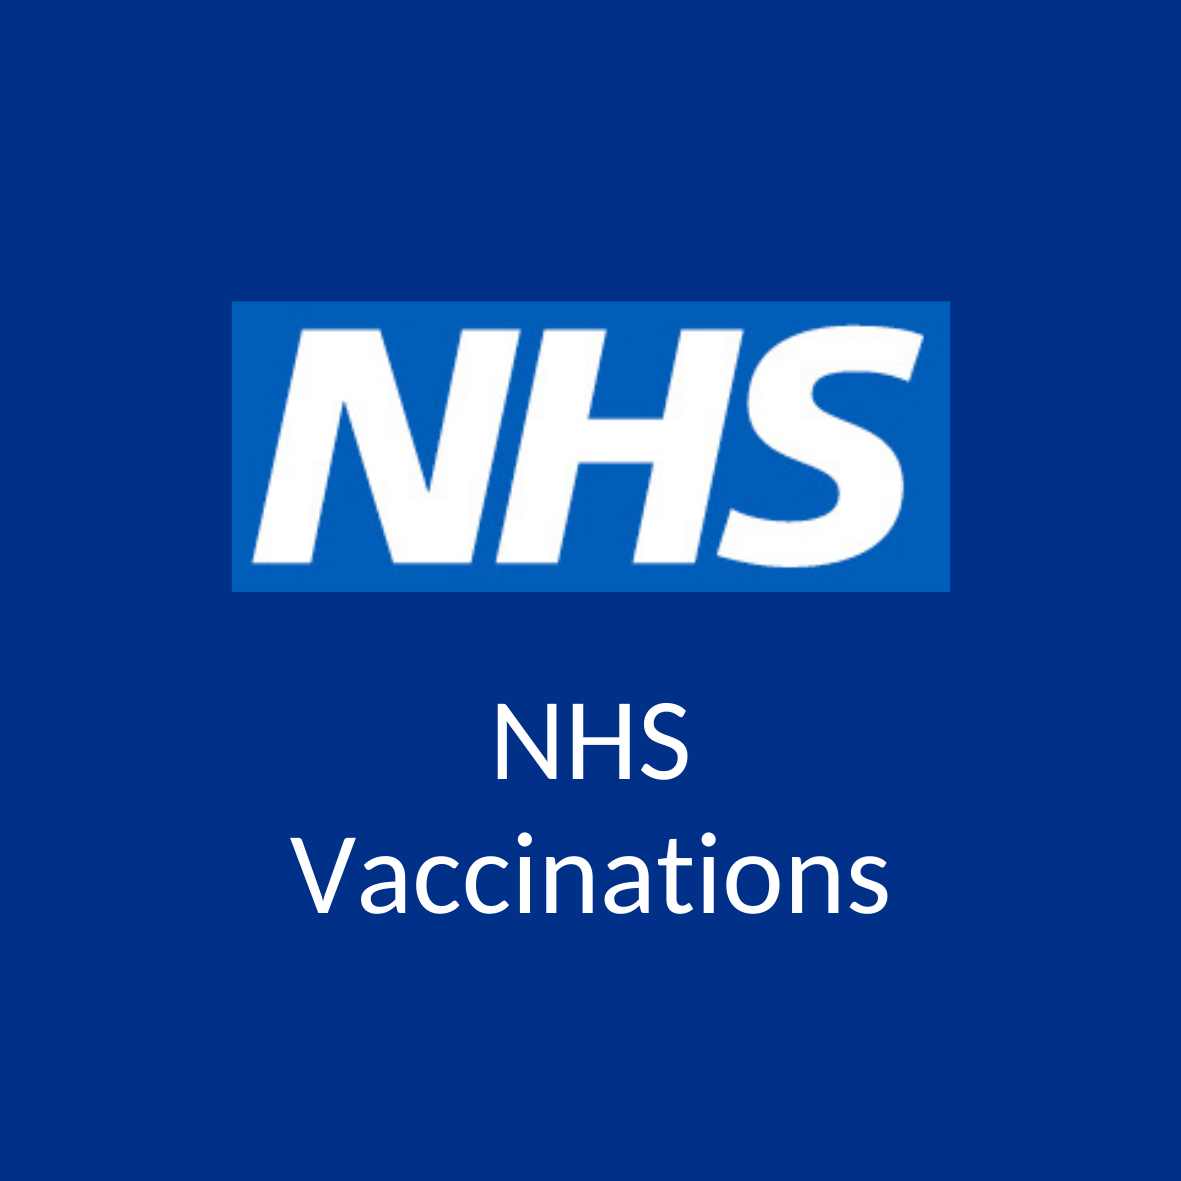 NHS Logo with Word 'NHS Vaccinations'